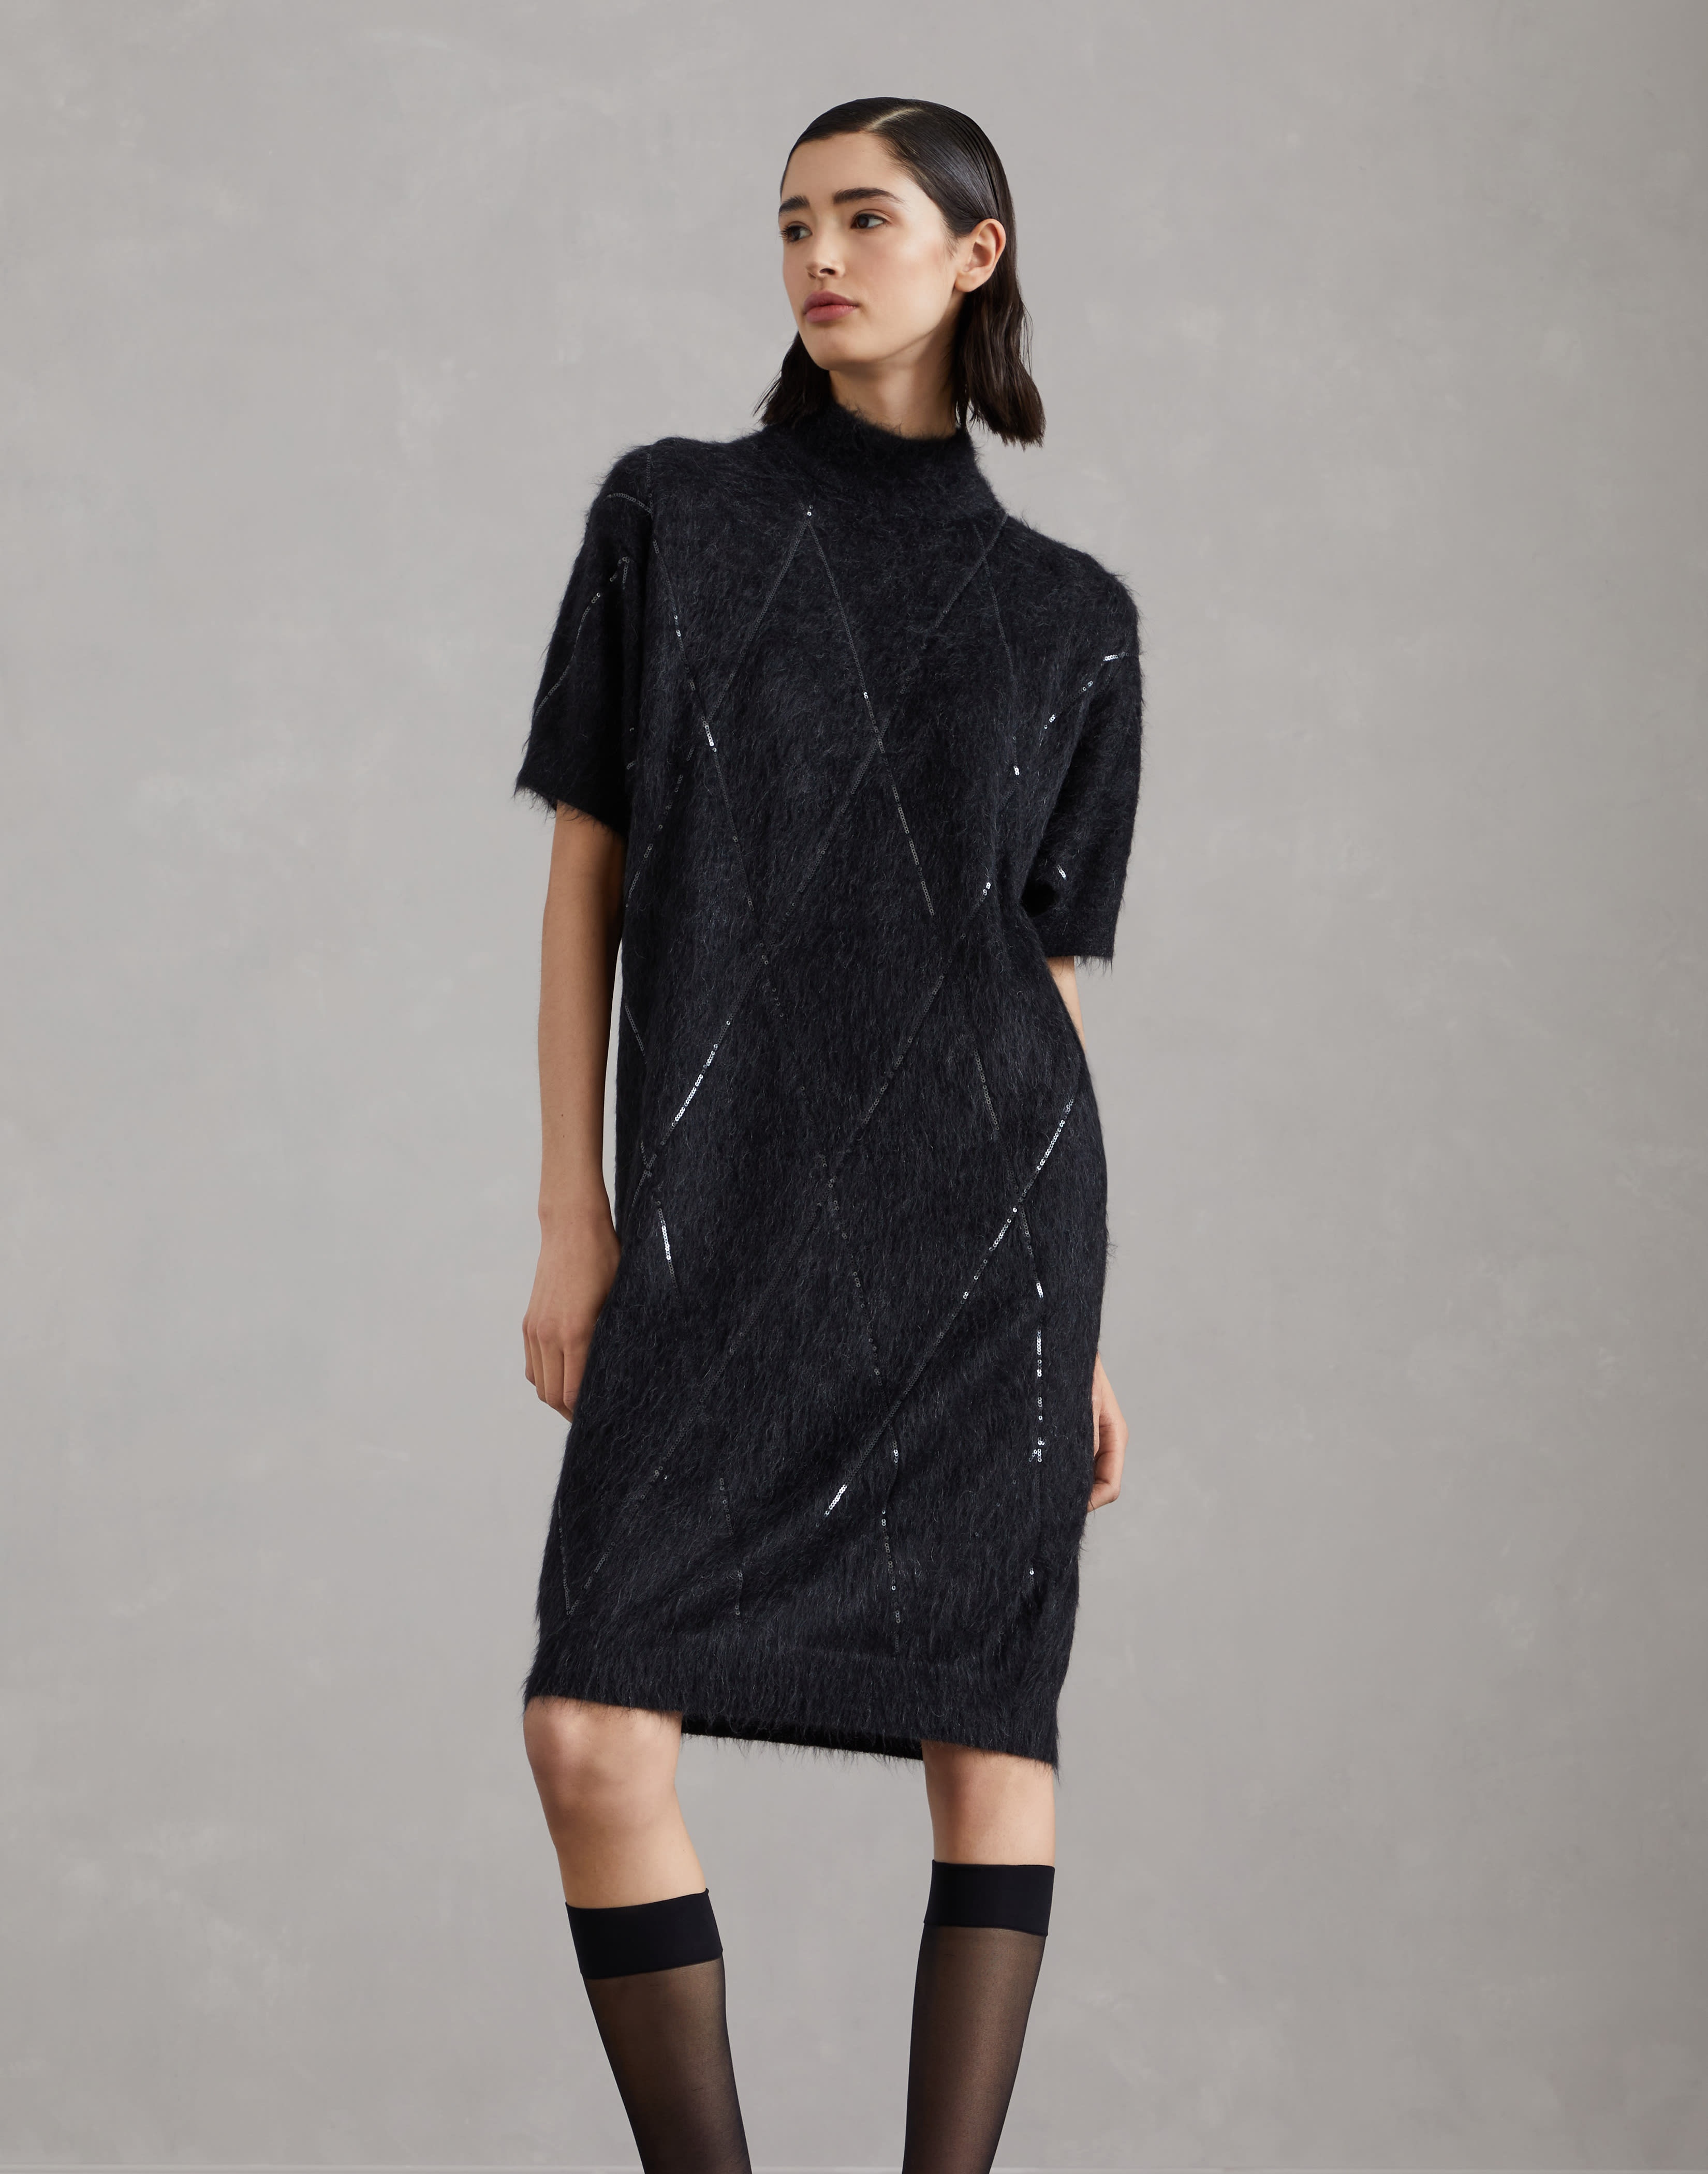 Mohair, wool, cashmere and silk knit dress with dazzling argyle embroidery - 1